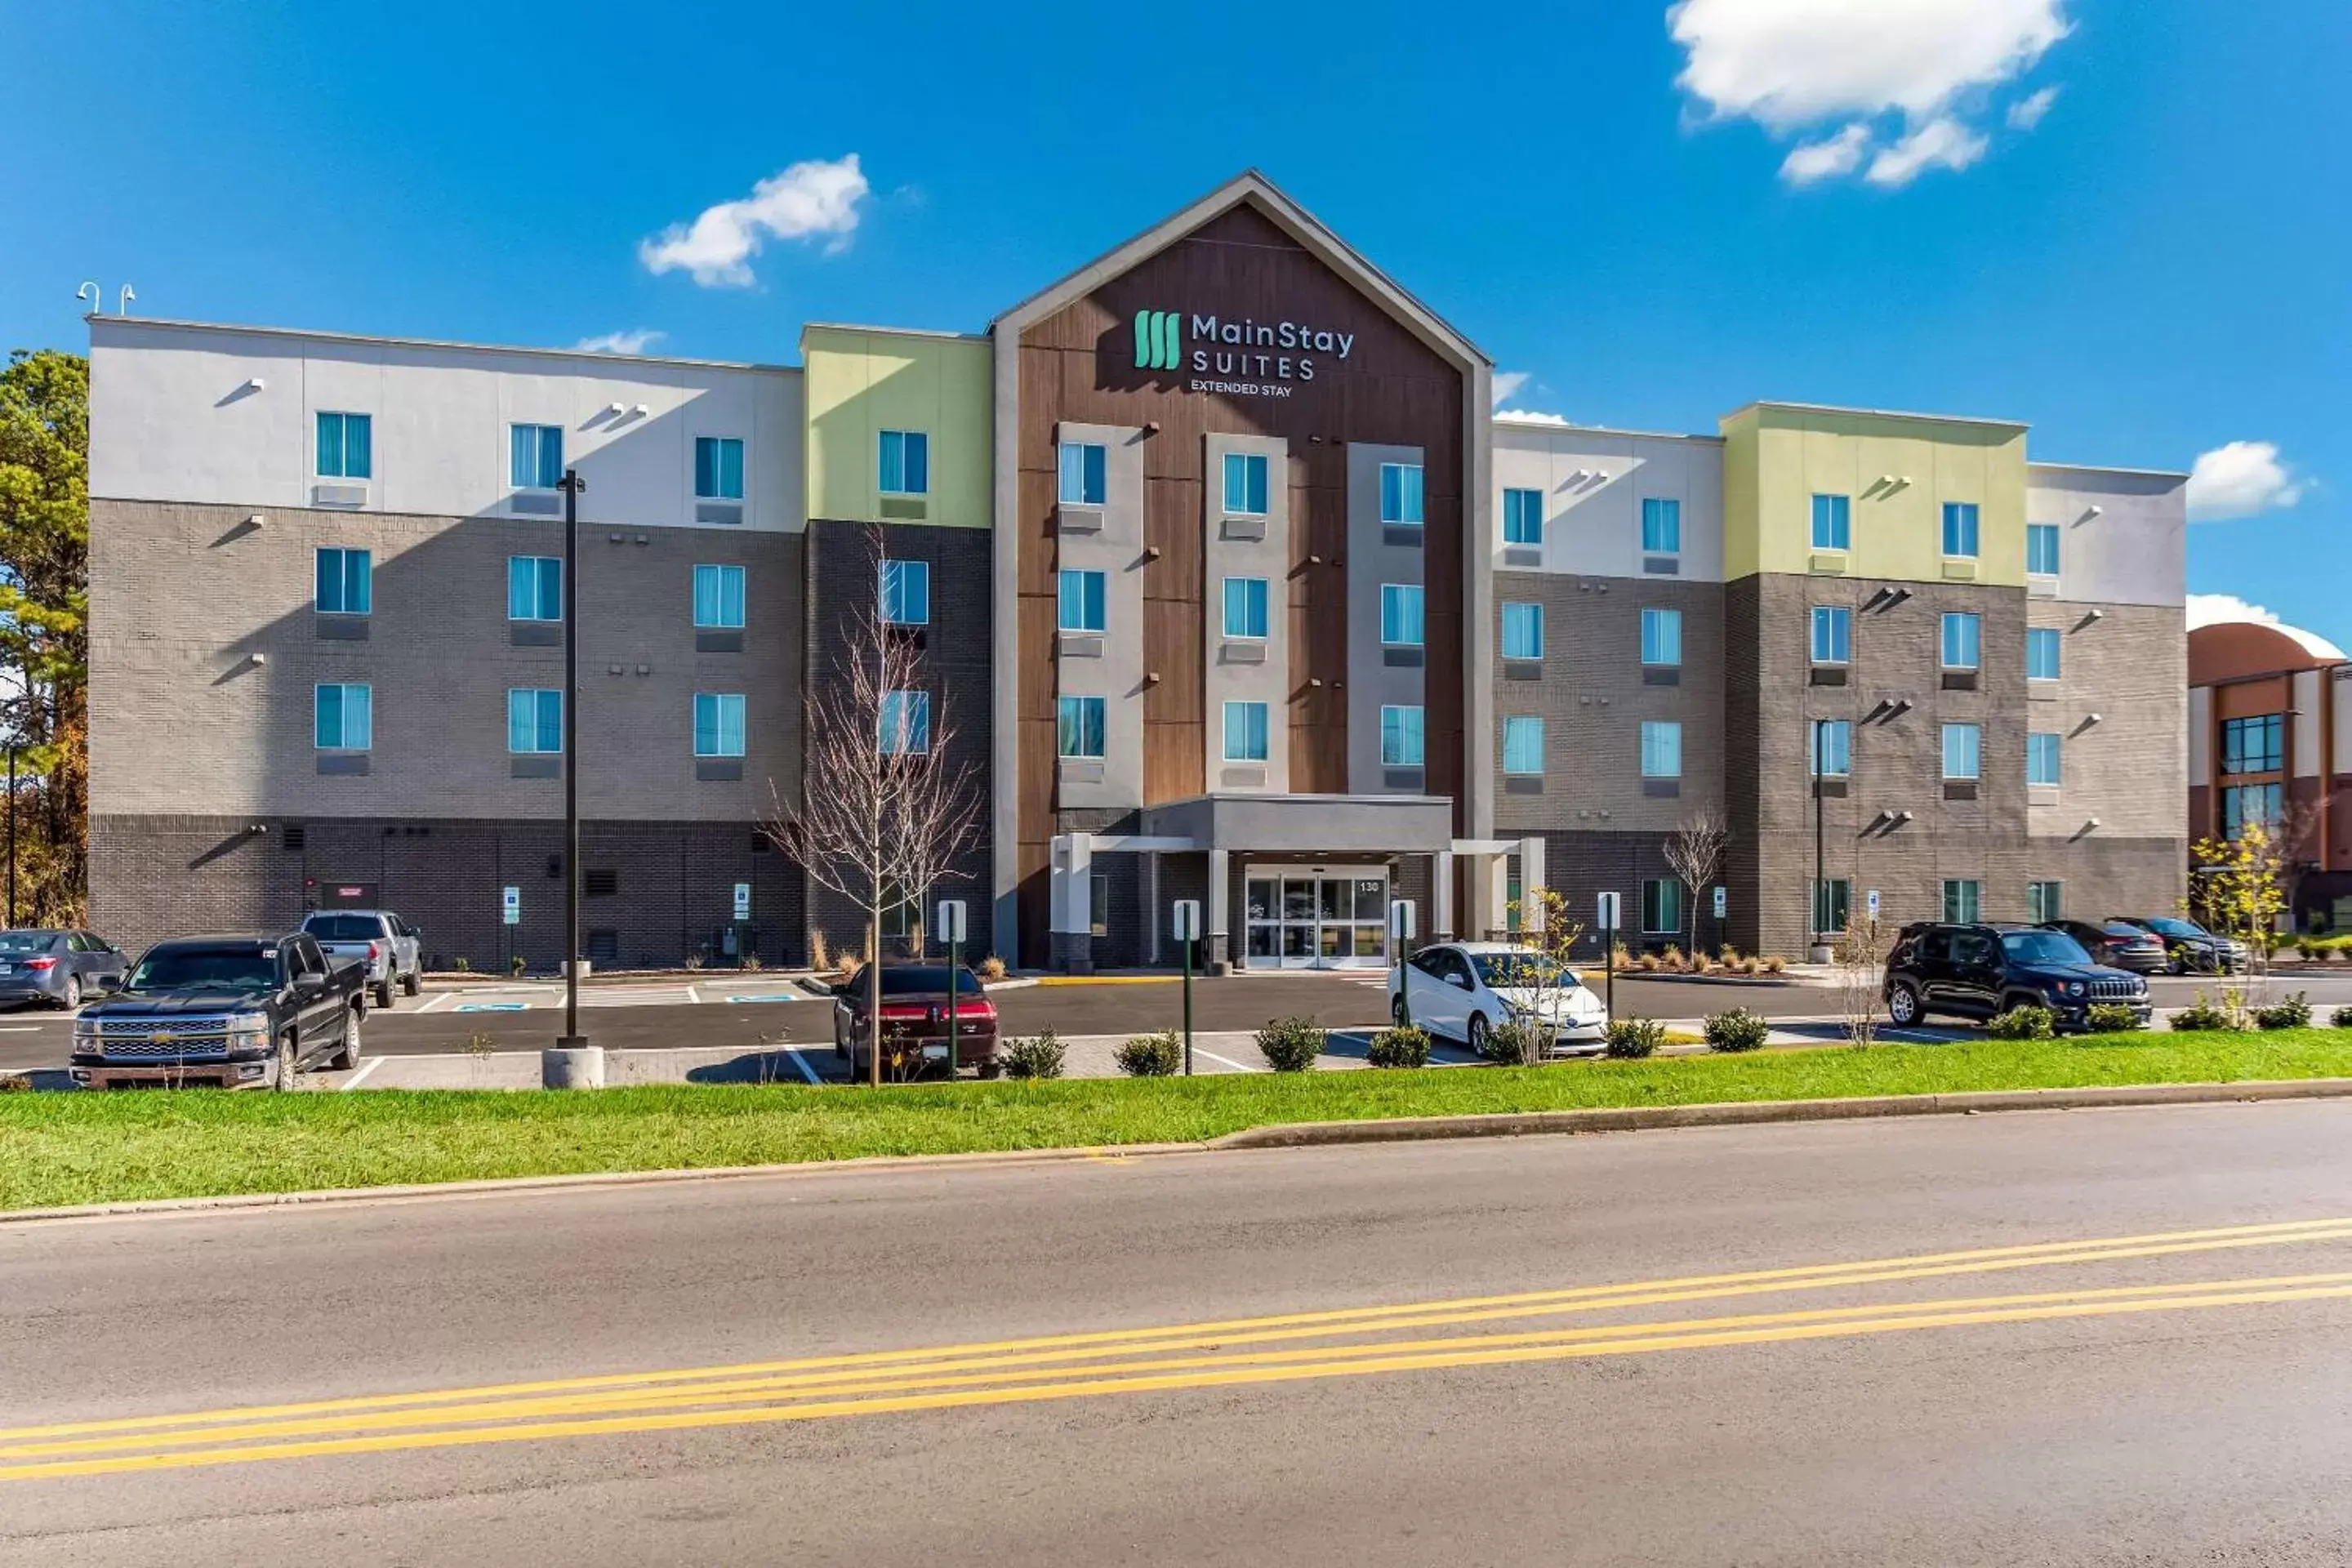 Property Building in MainStay Suites Murfreesboro